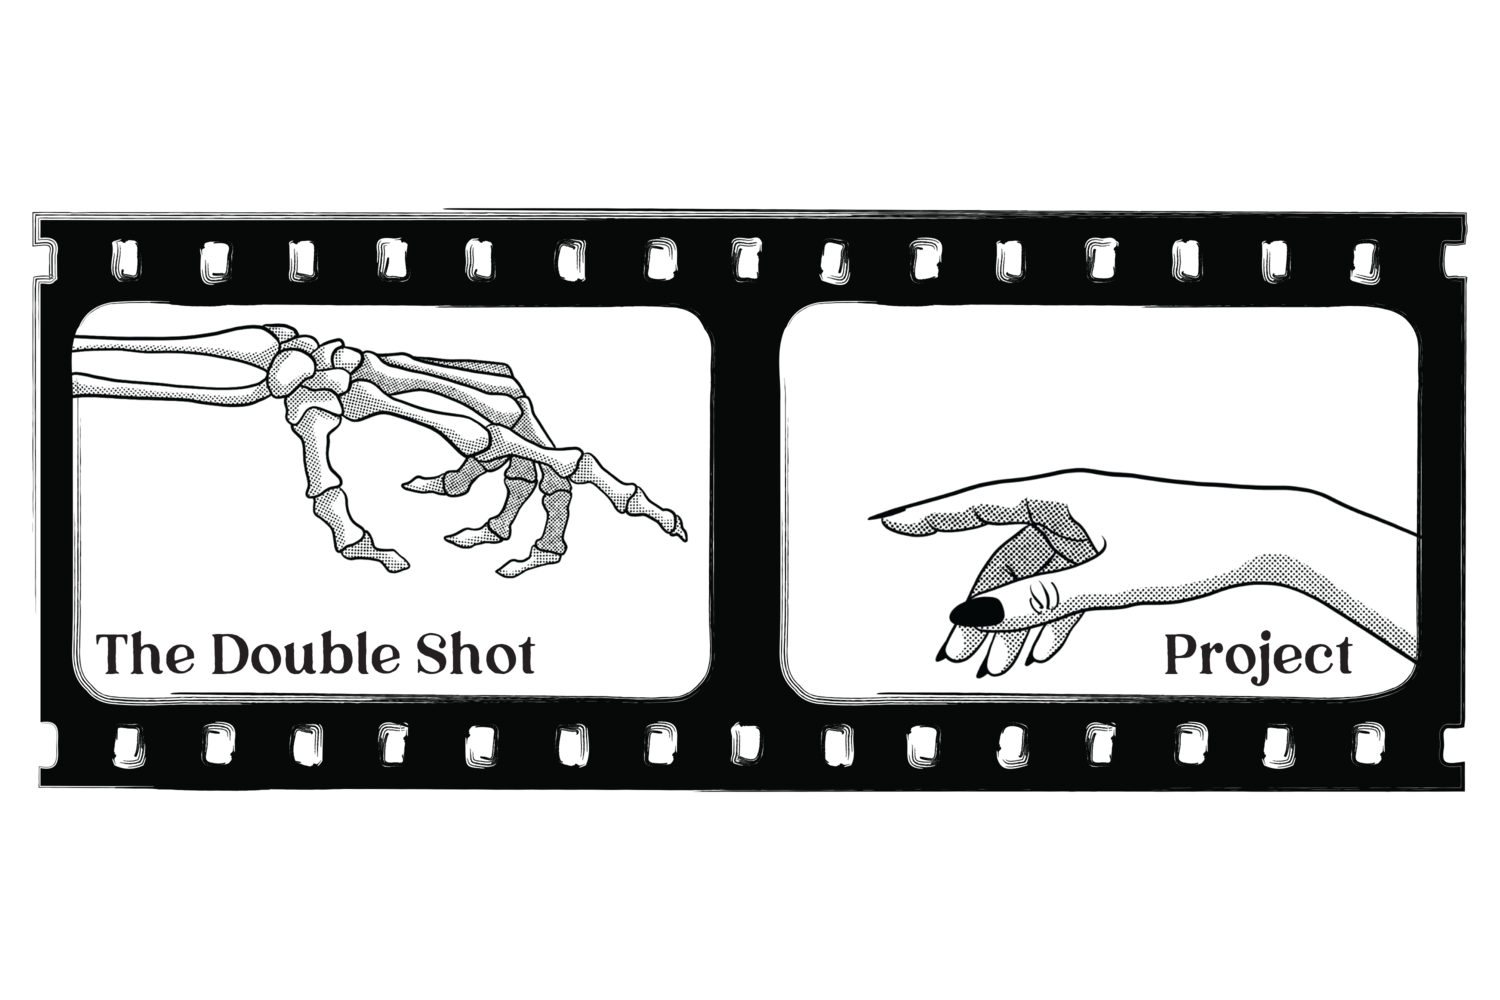 The Double Shot Project